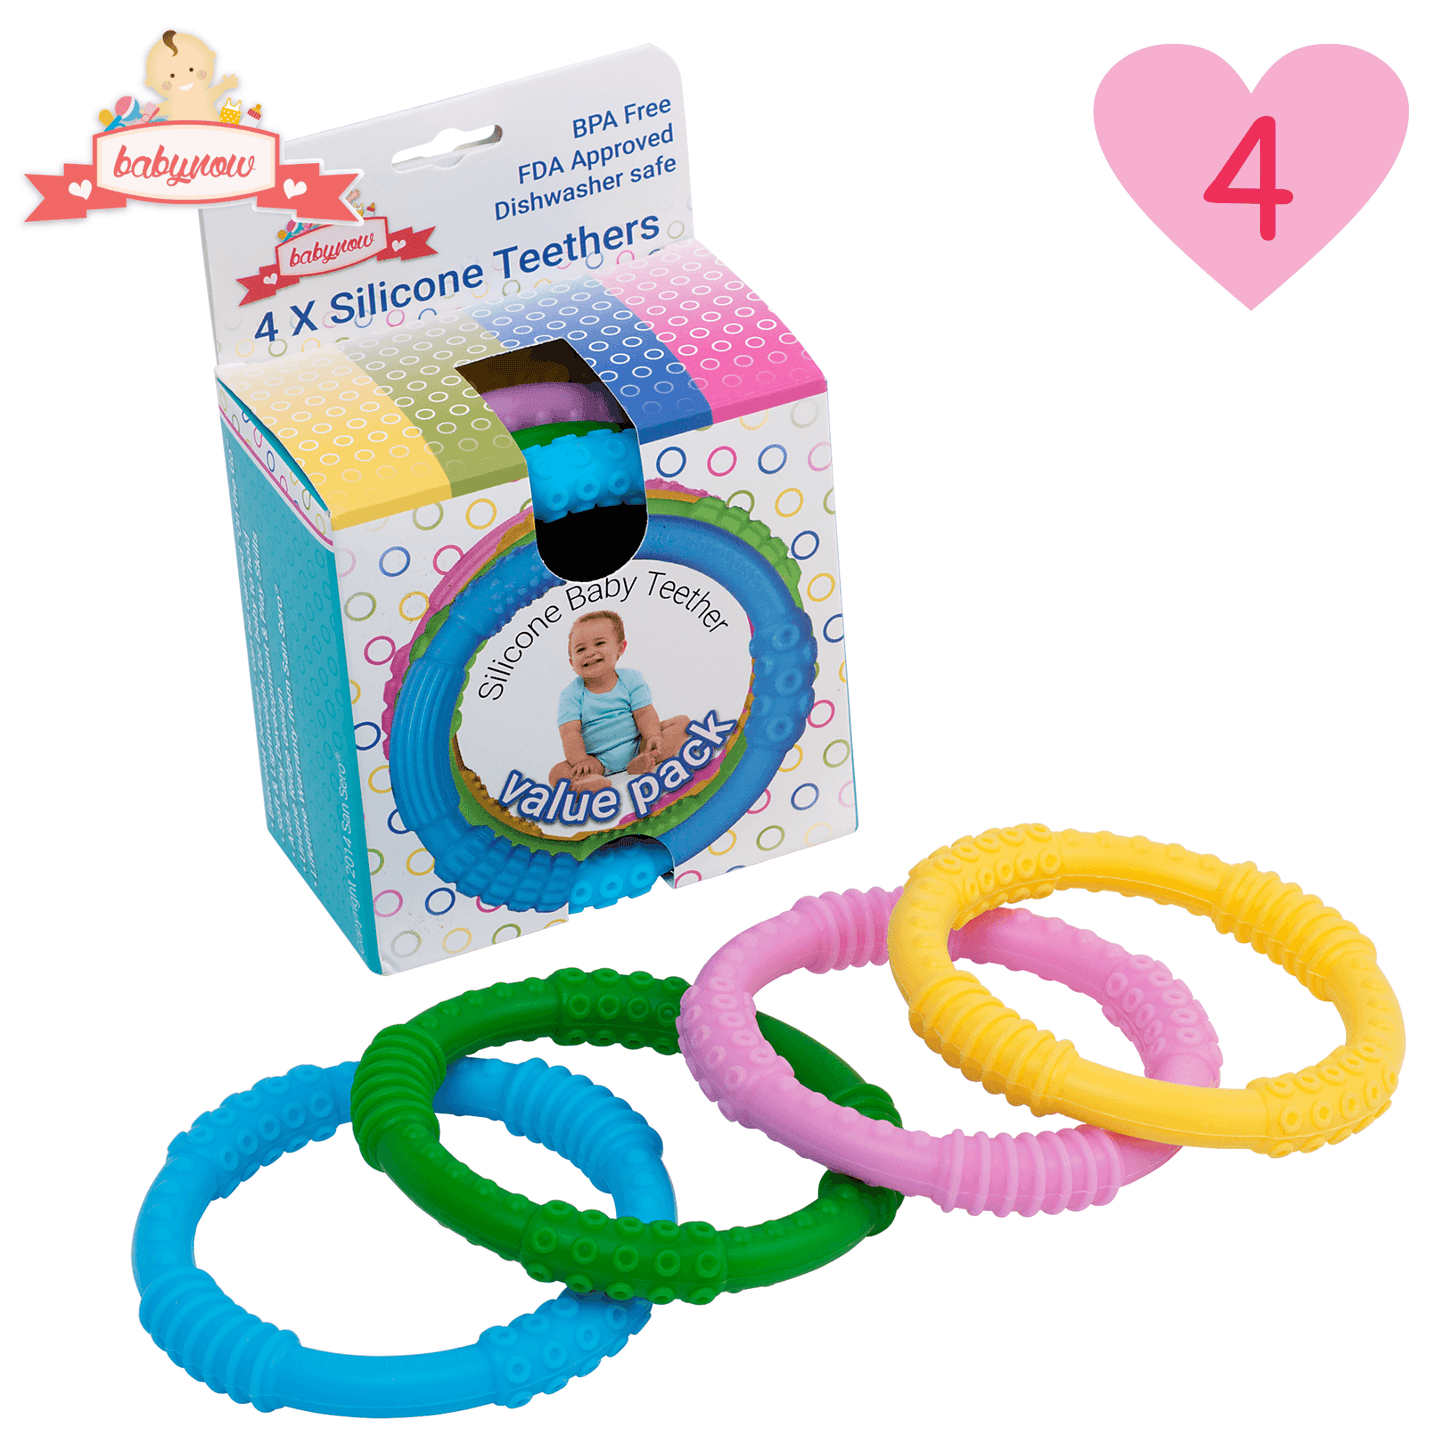 BABY Teething Ring - Sensory Teether Soother Pacifier 2.5"